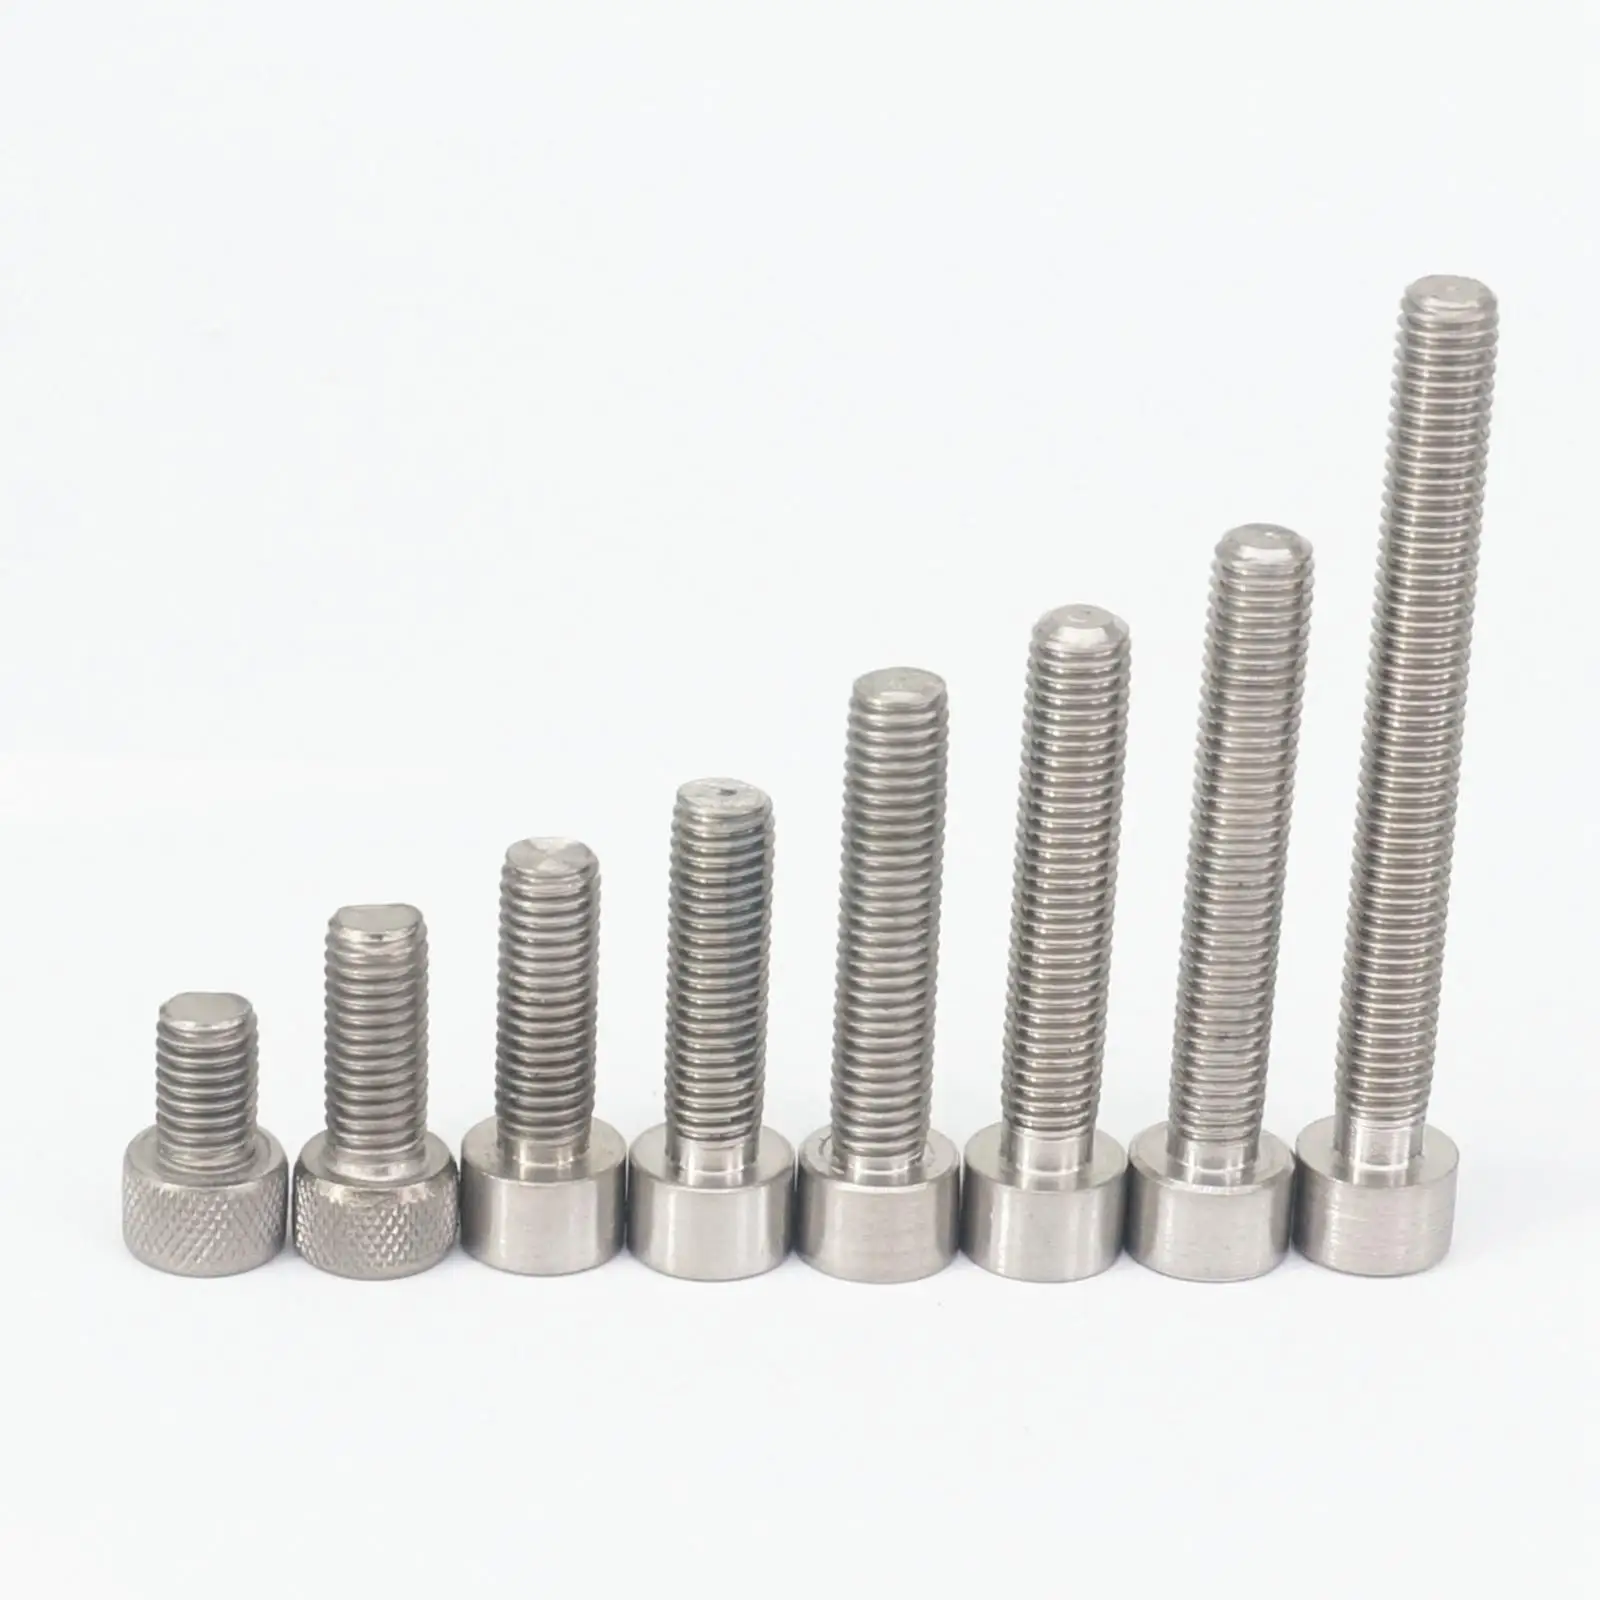 M8 titanium bolts hex head drilled 1.25 pitch M8x15 to M8x90 all sizes 